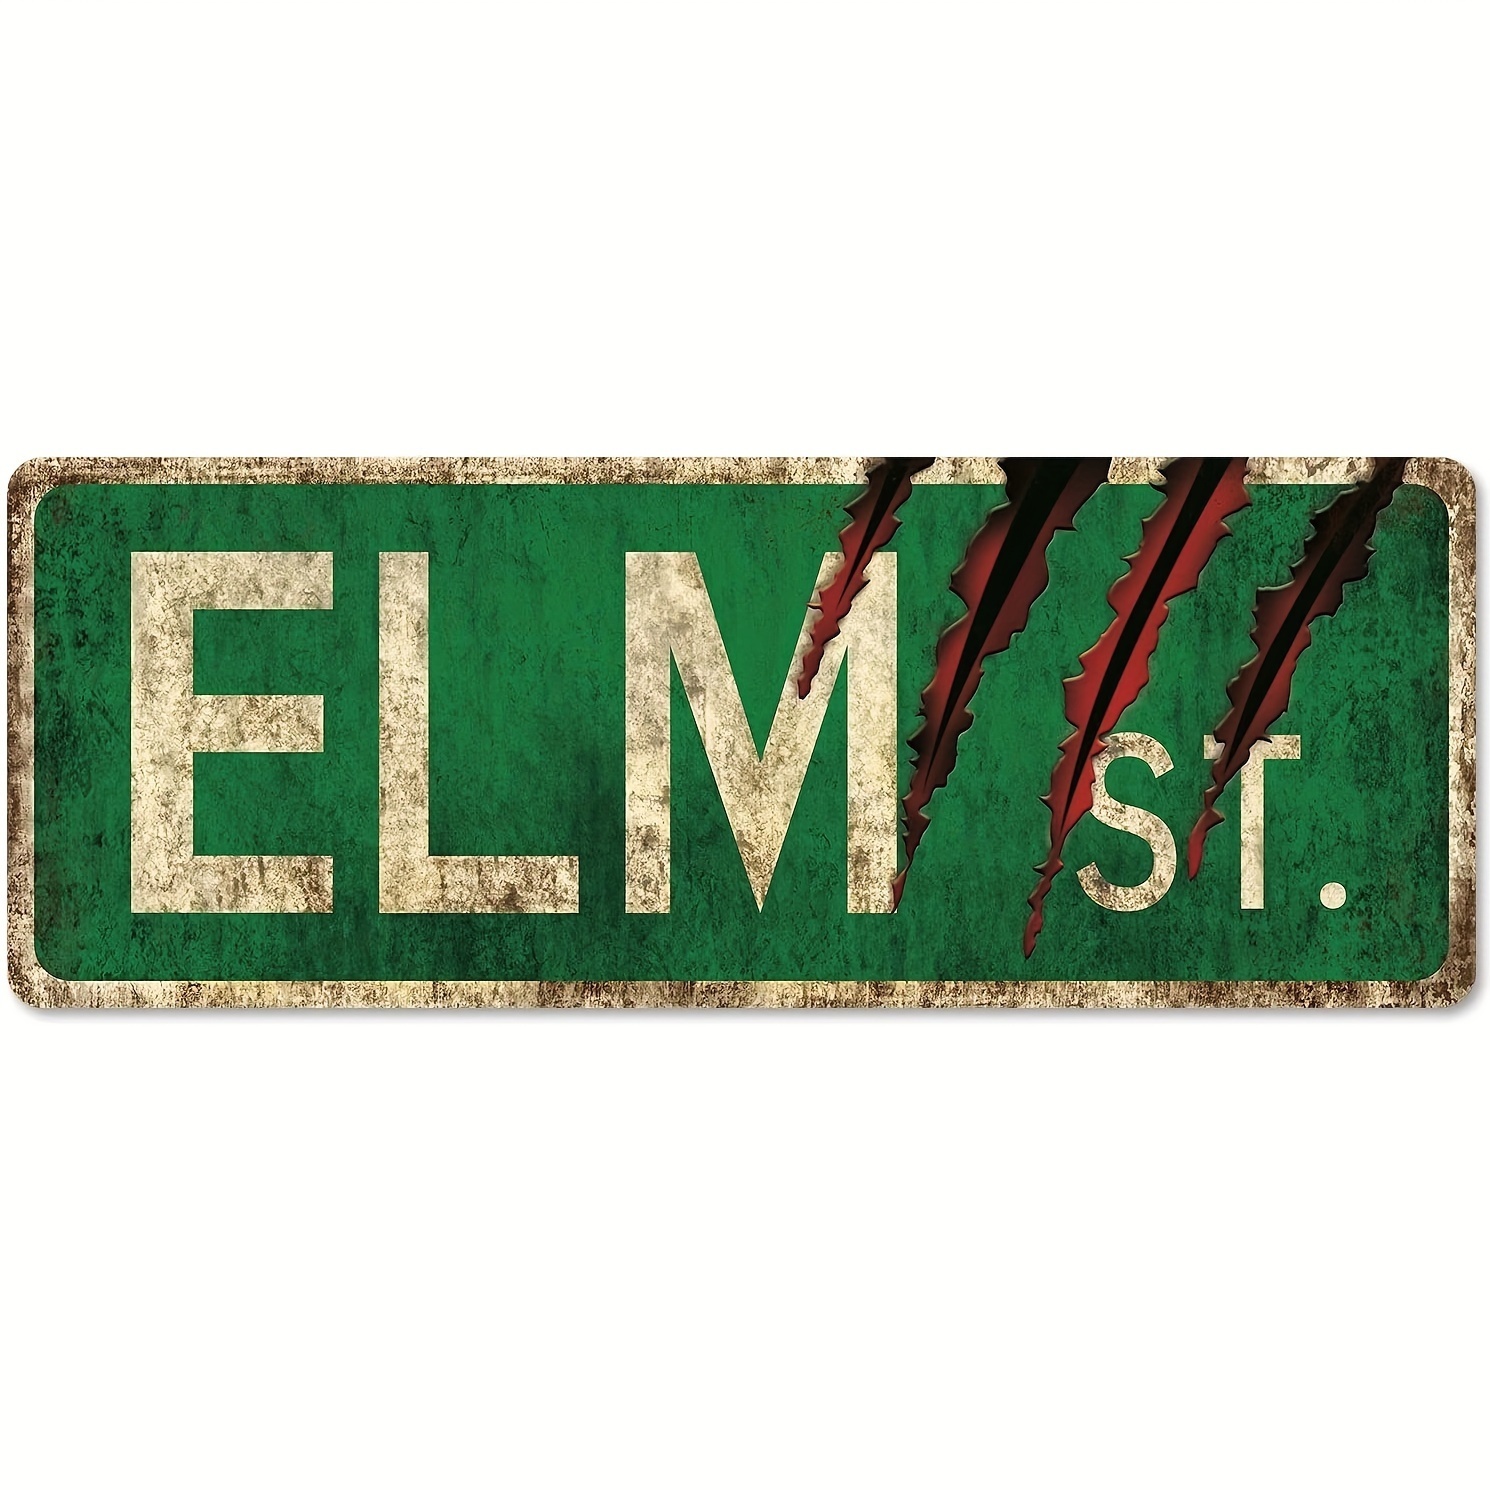 

1pc Metal Tin Sign, Elm Street Road Sign, Horror Movie Metal Sign, Outdoor Signpost Rustic Retro Metal Decorative Wall Sign, 6*16inch